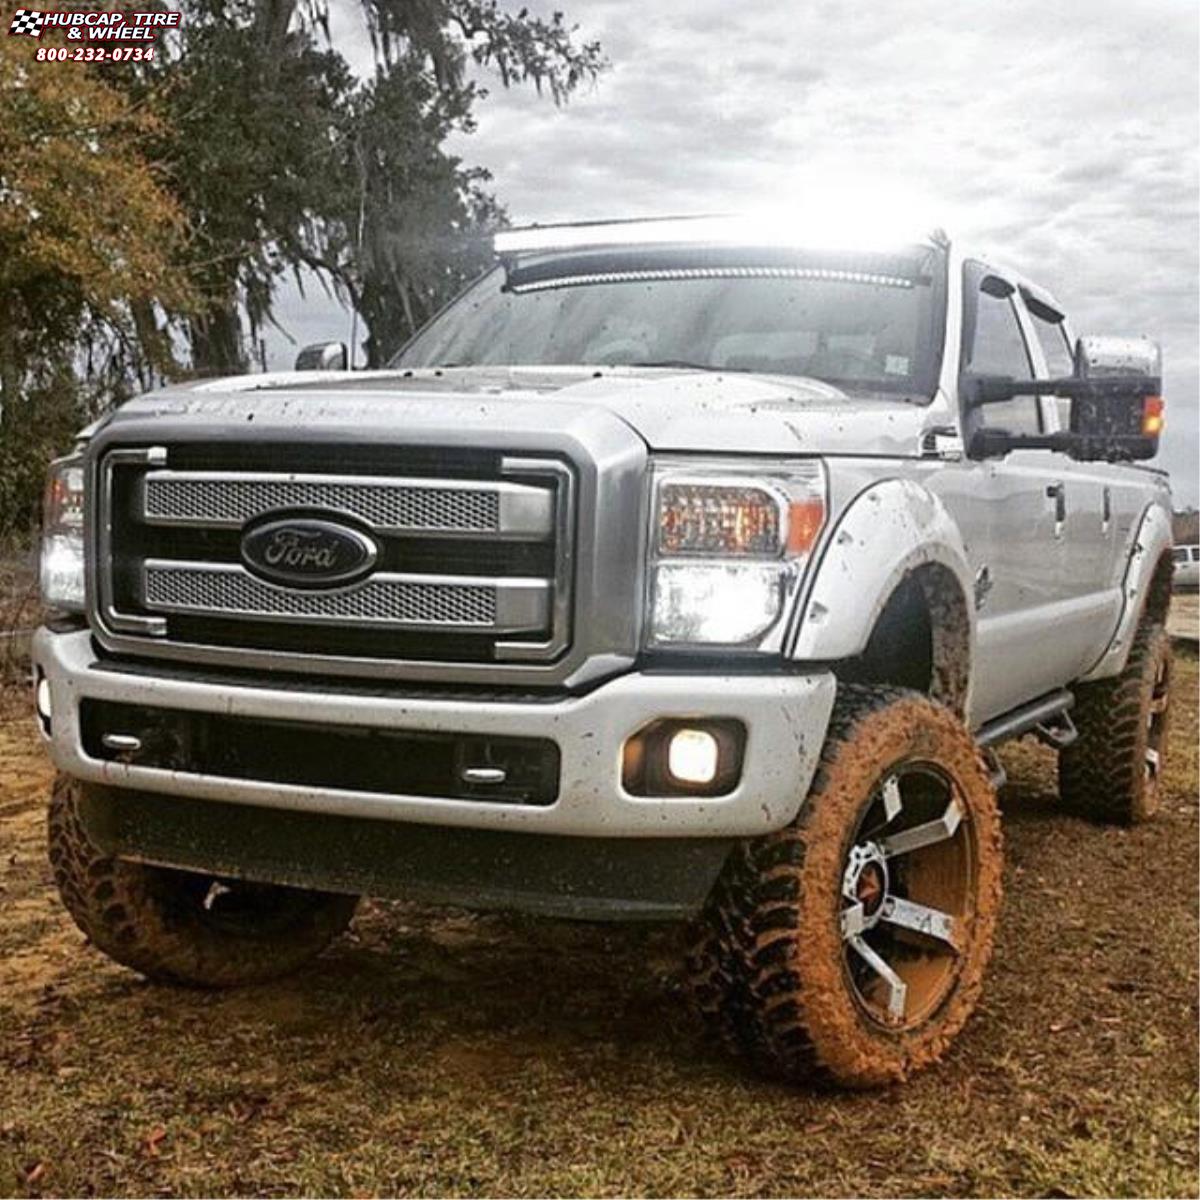 vehicle gallery/ford f 250 xd series xd811 rockstar 2  Satin Black White Inserts wheels and rims